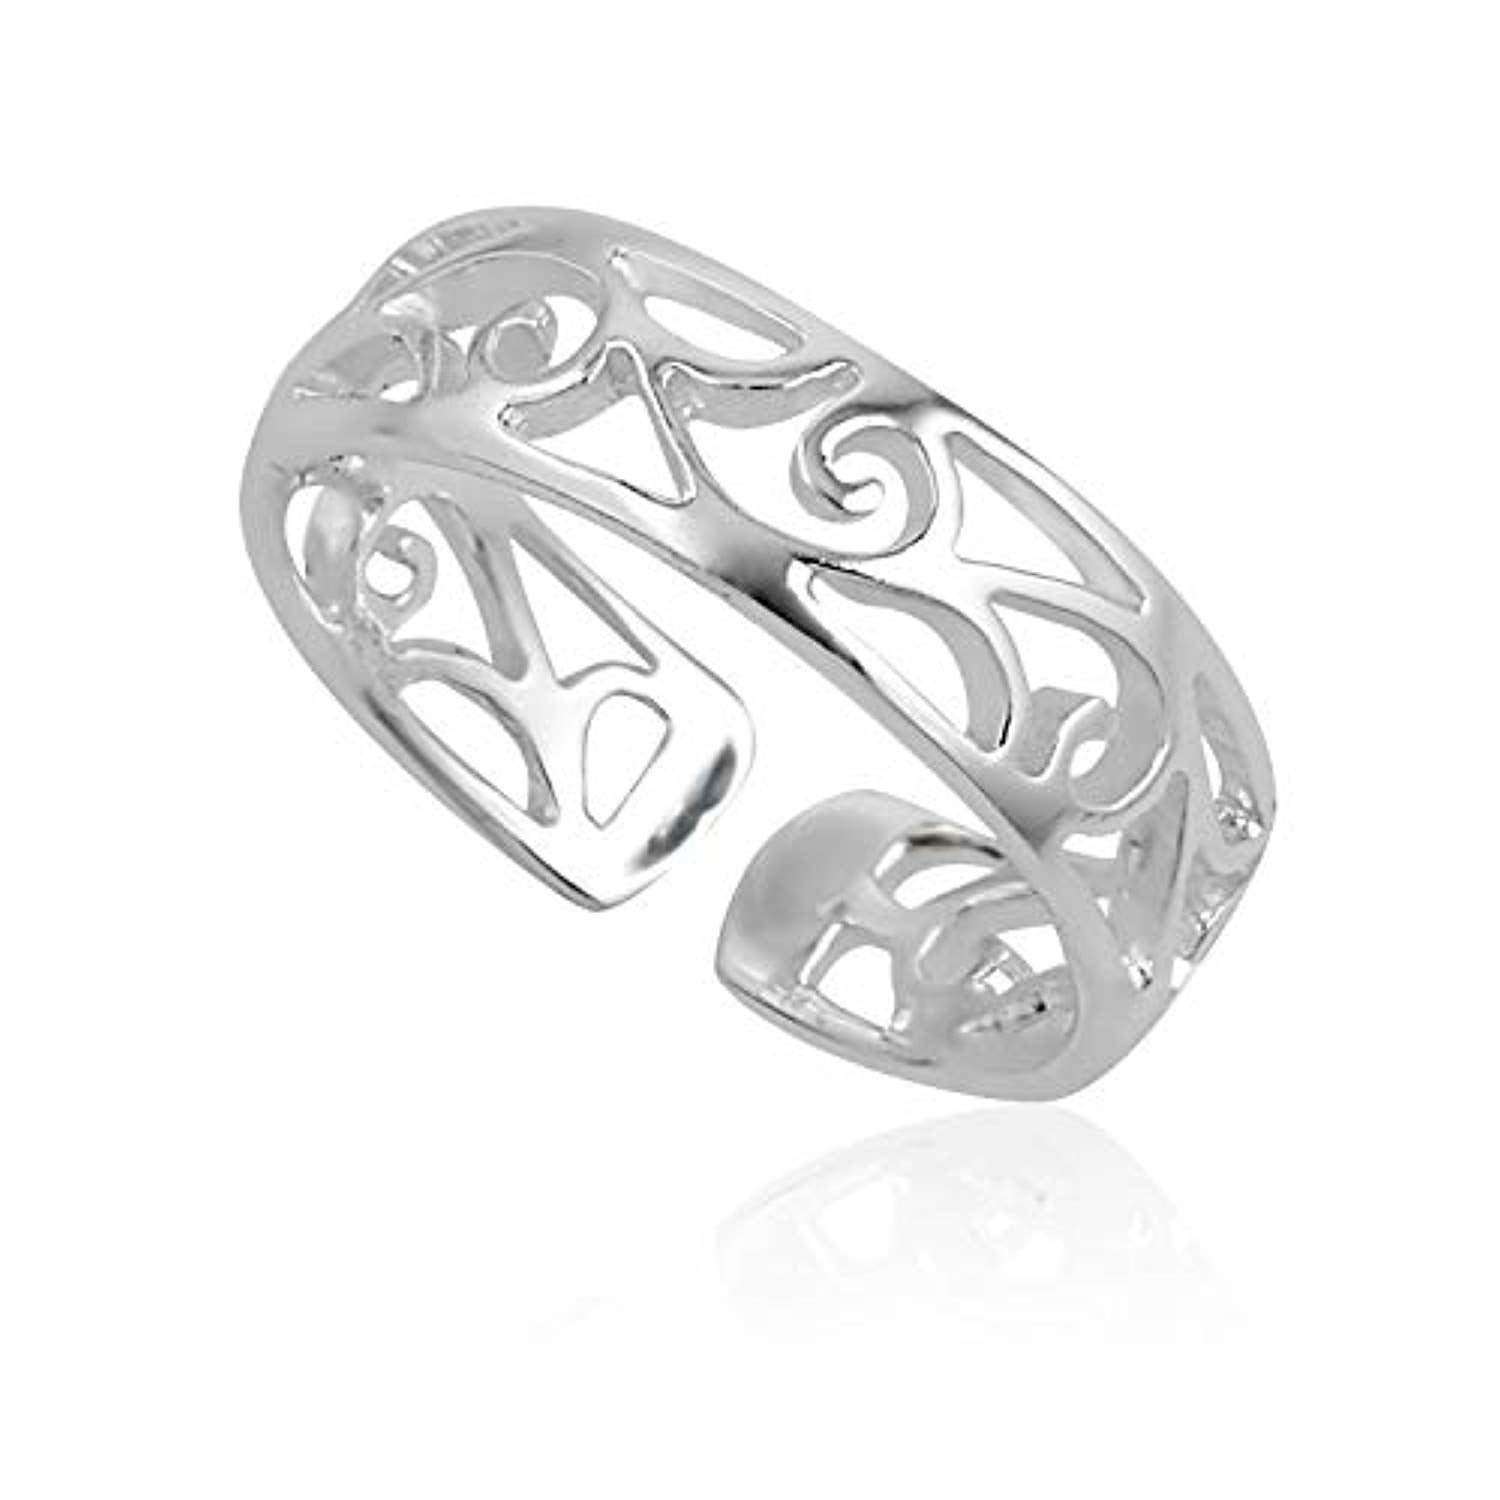 Adjustable wave toe ring in 925 Sterling Silver